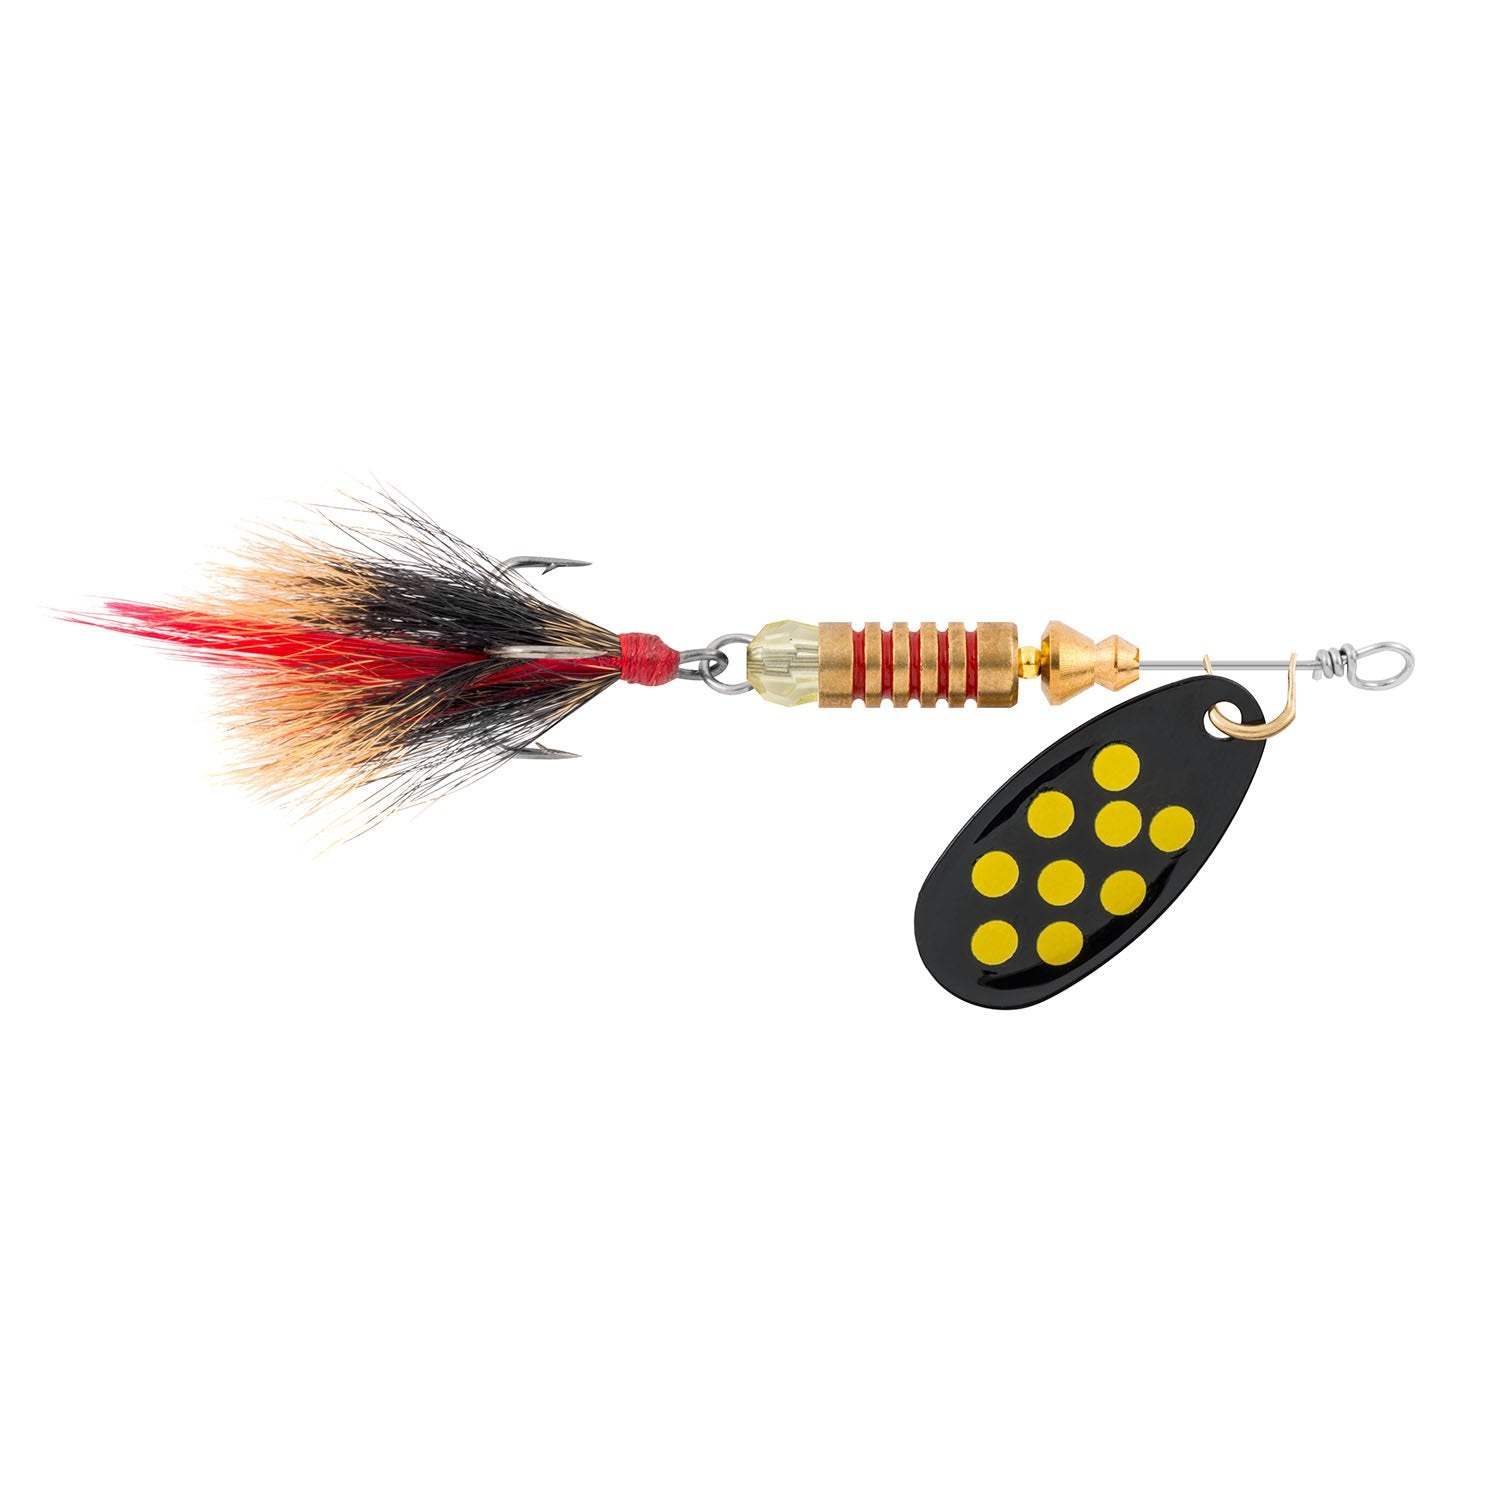 Crappie Kit - Plain and Dressed Assortment - Fishing Lure